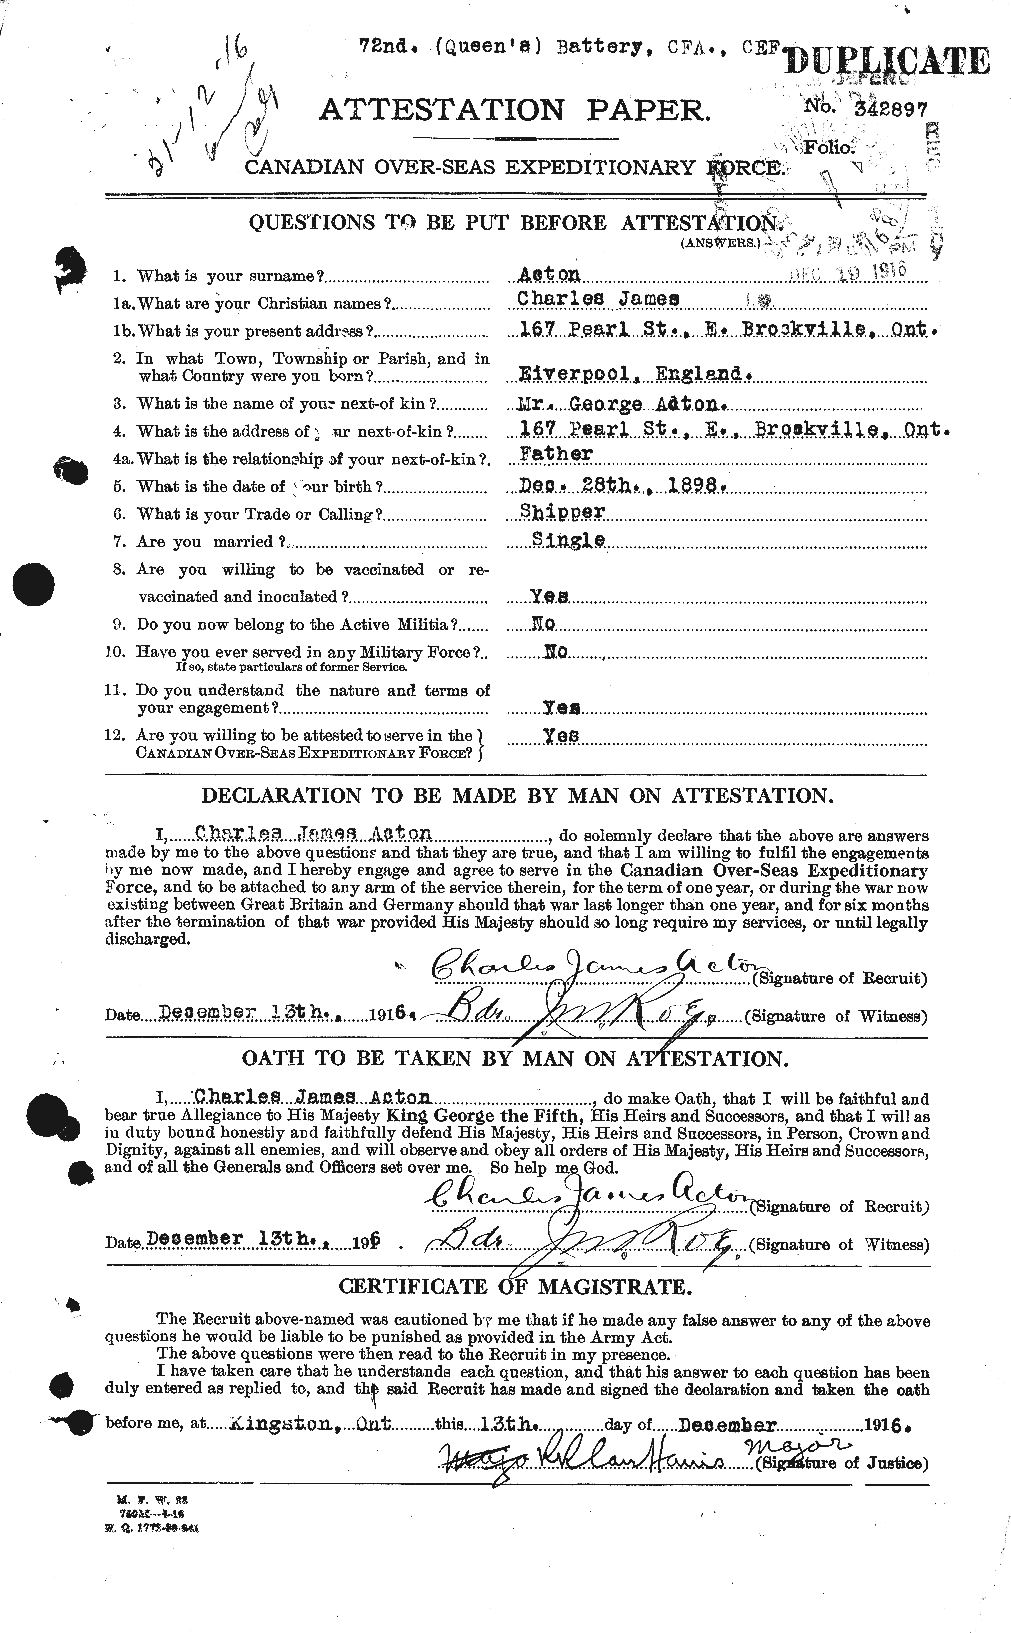 Personnel Records of the First World War - CEF 200893a